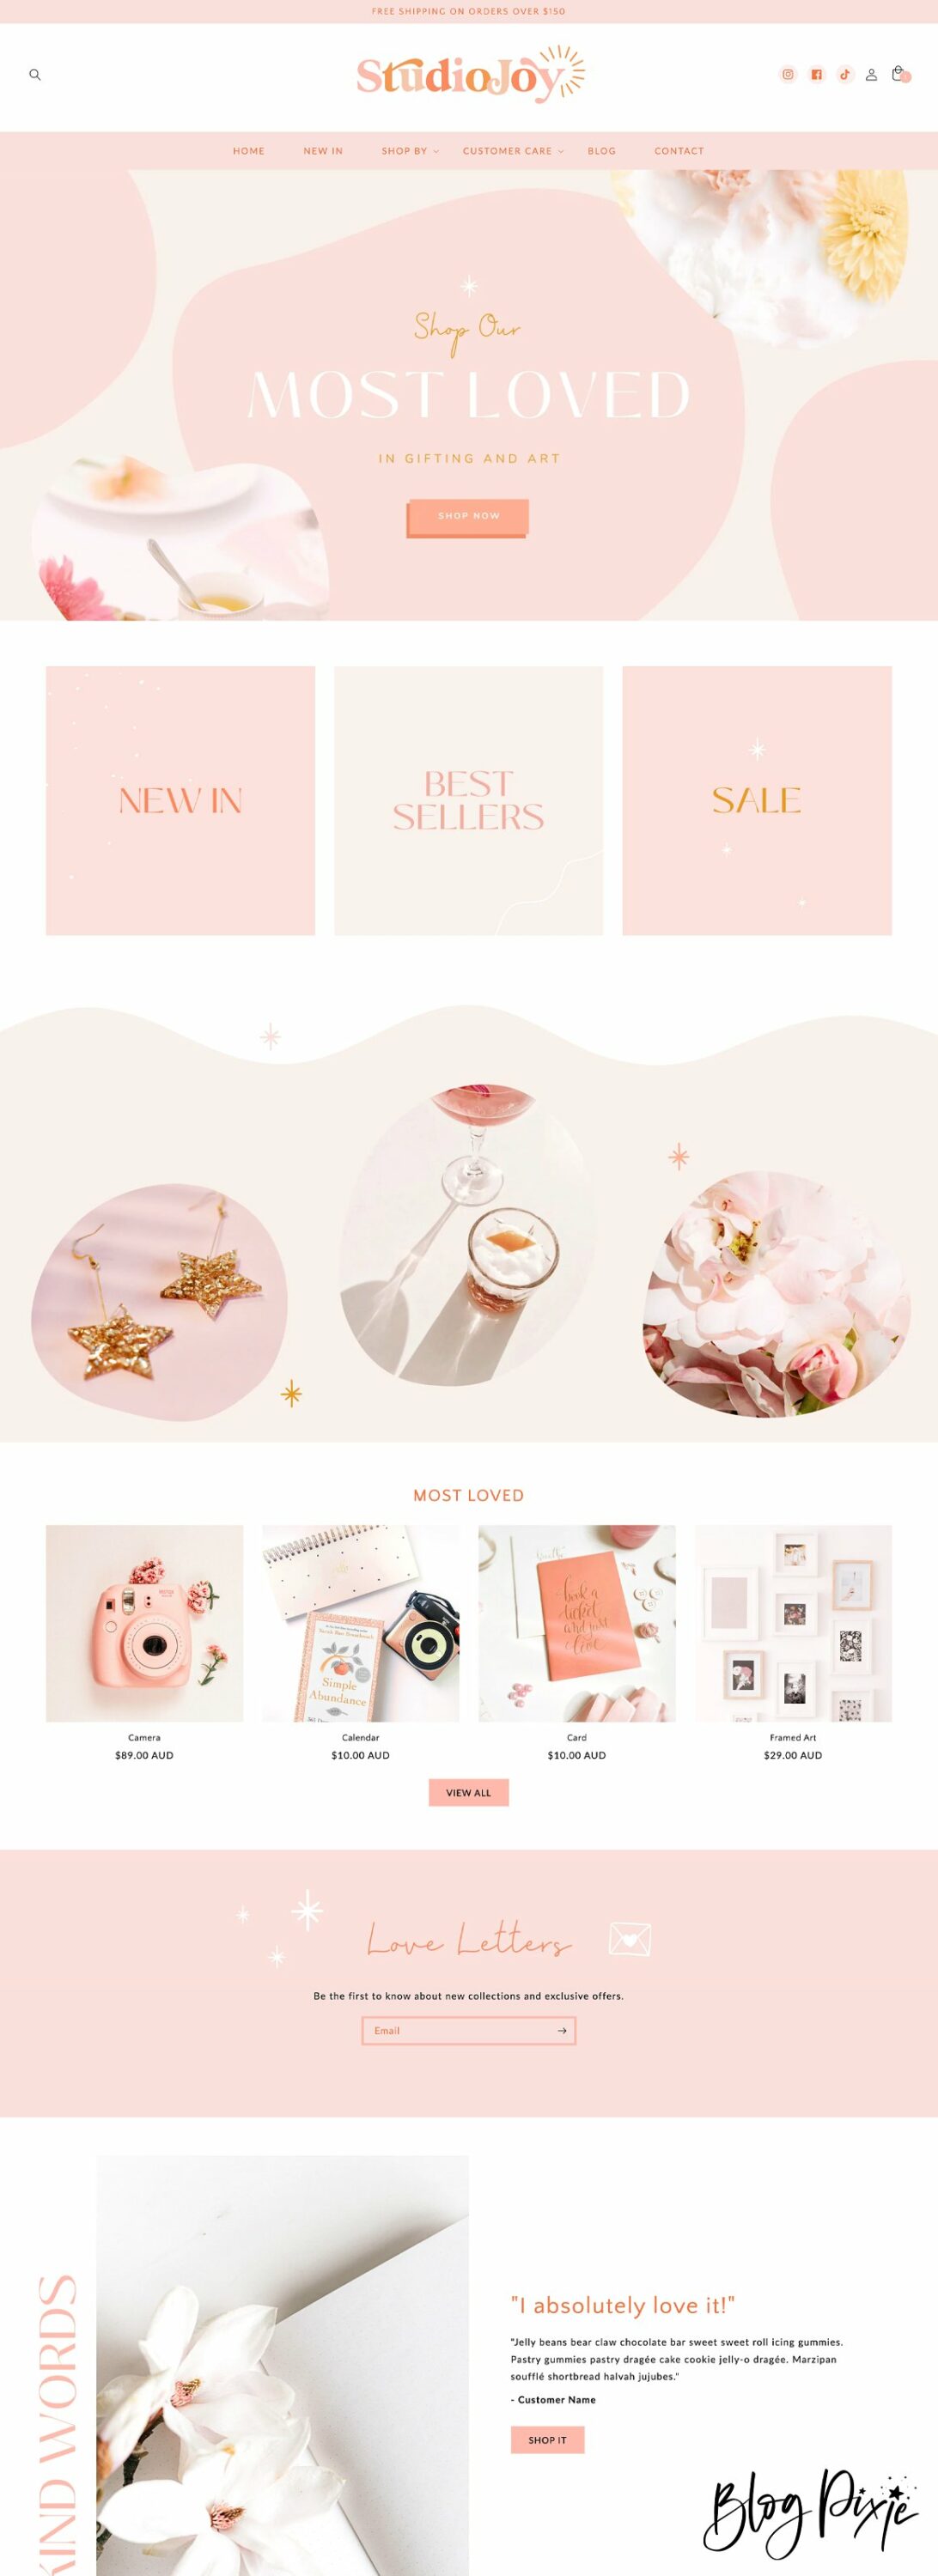 Page image of exquisite Shopify theme in pastel colors.